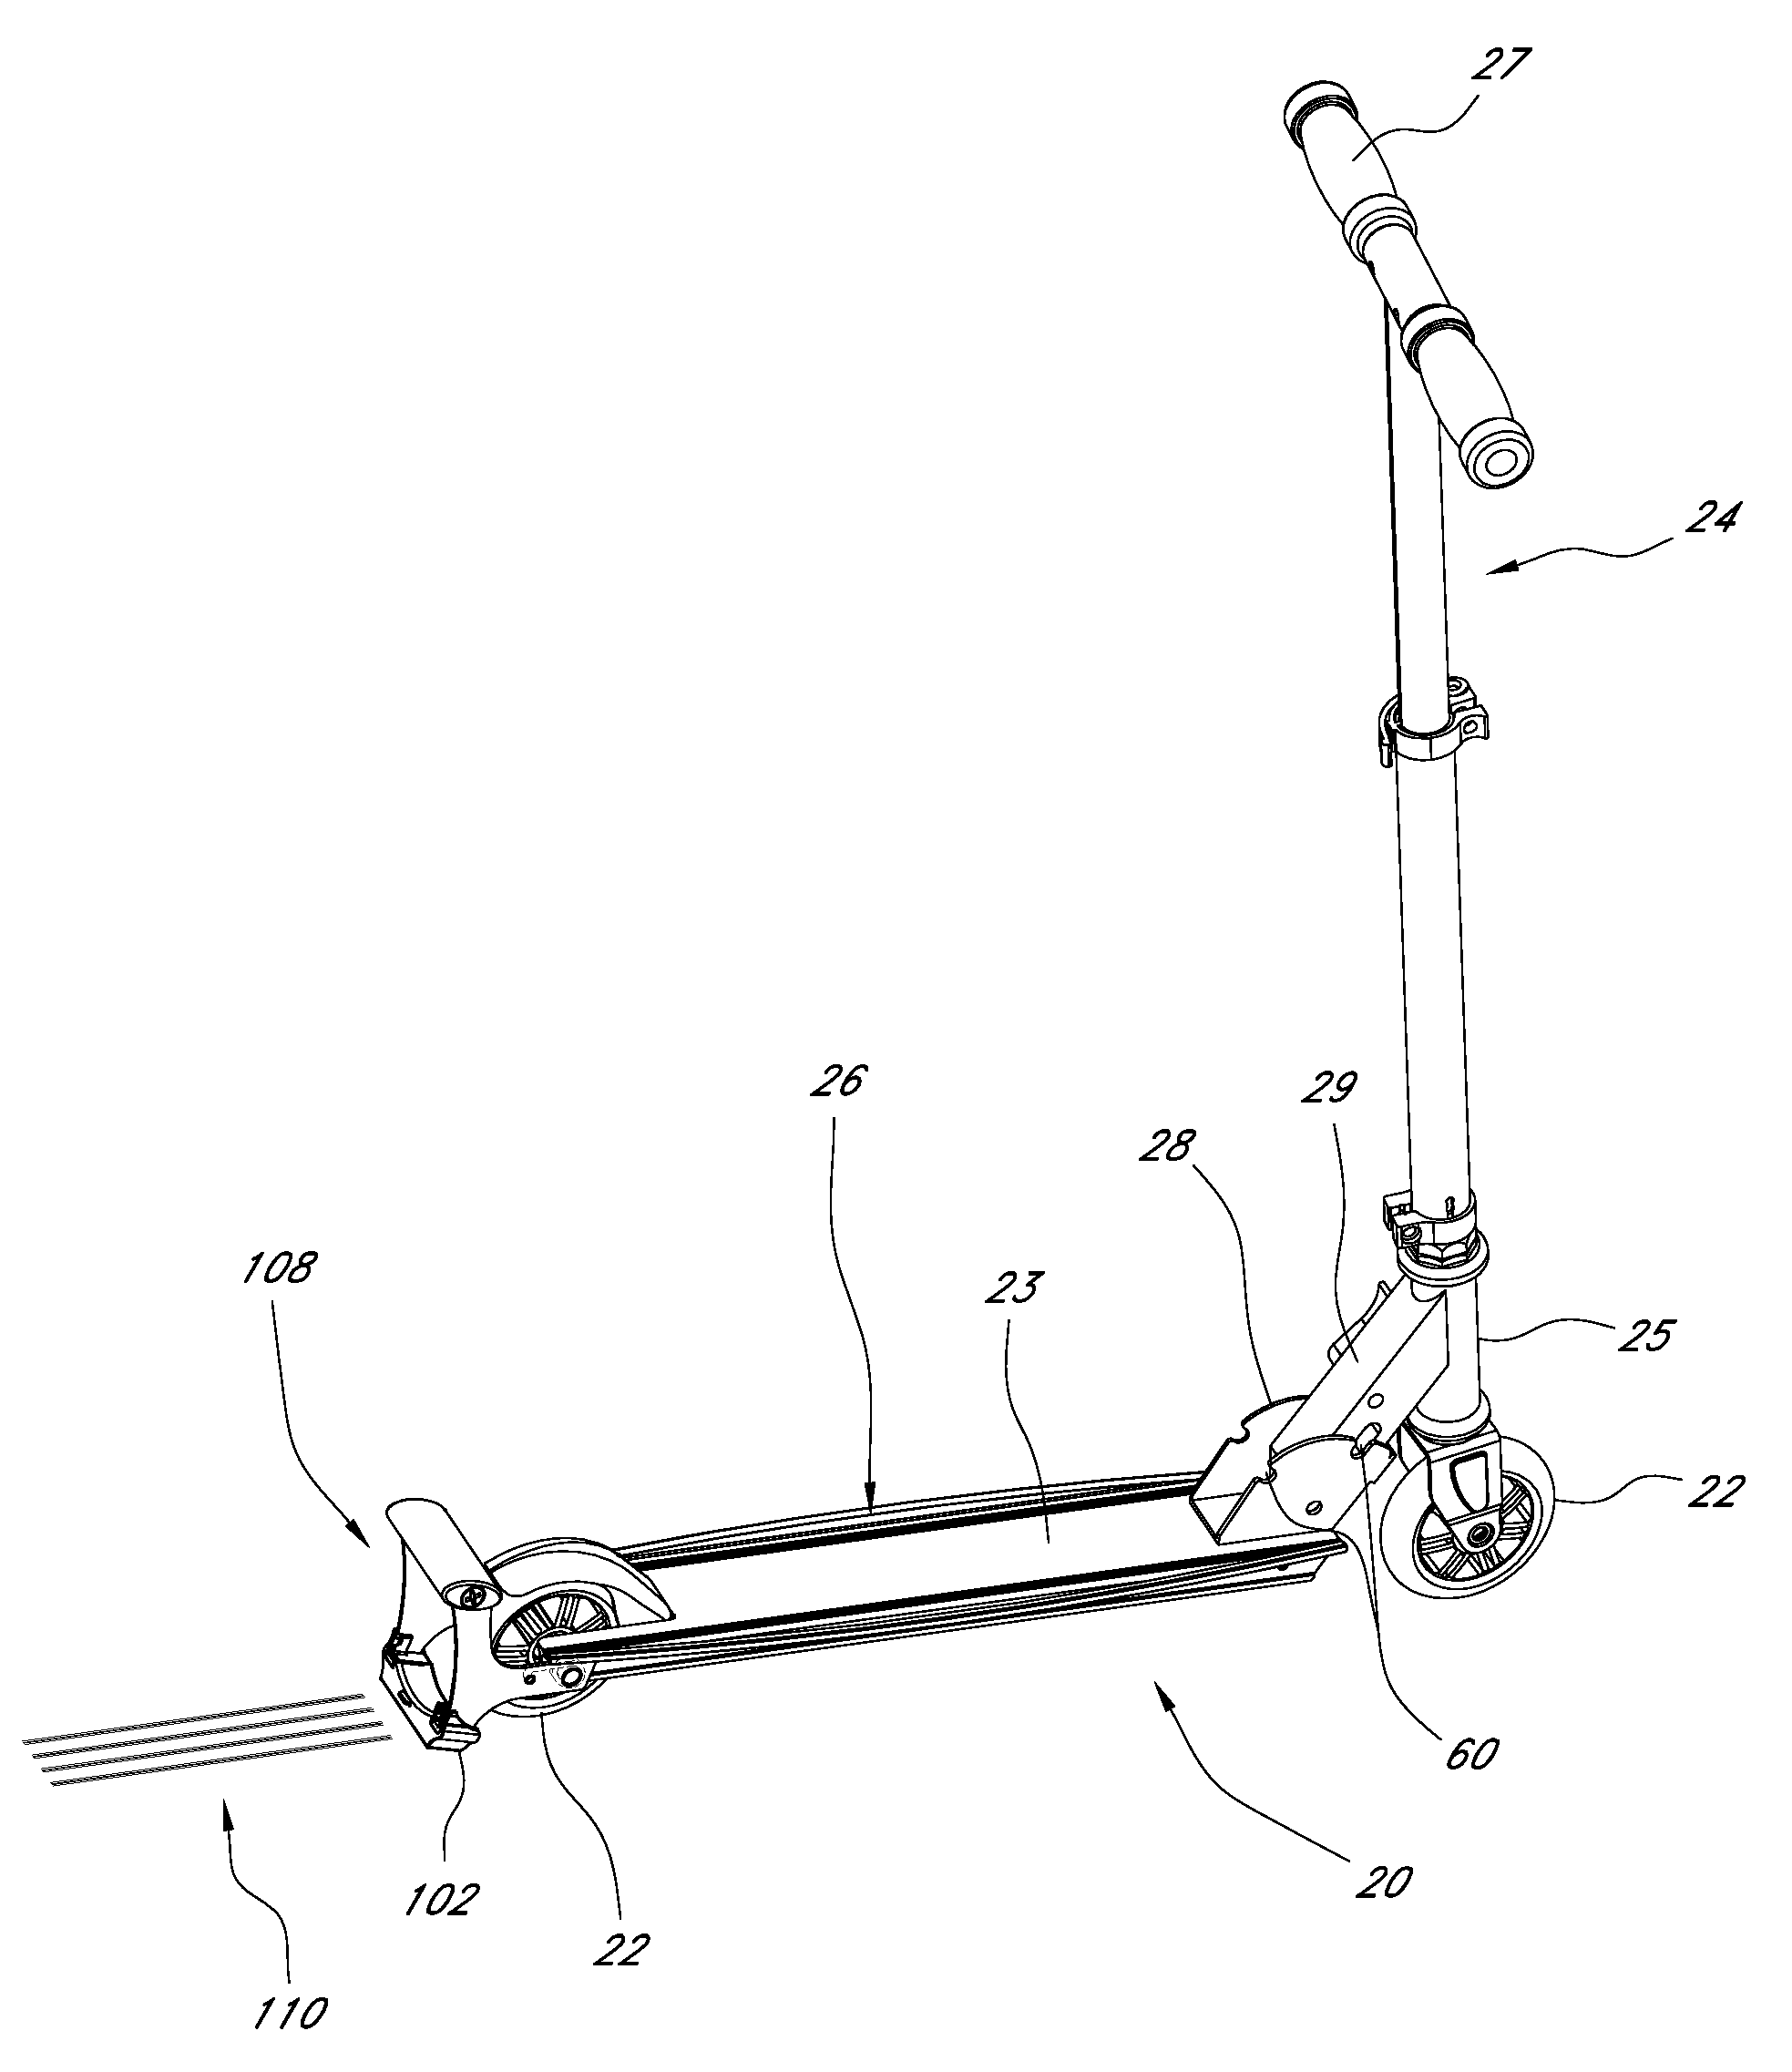 Marking device for scooter and removable marking cartridge